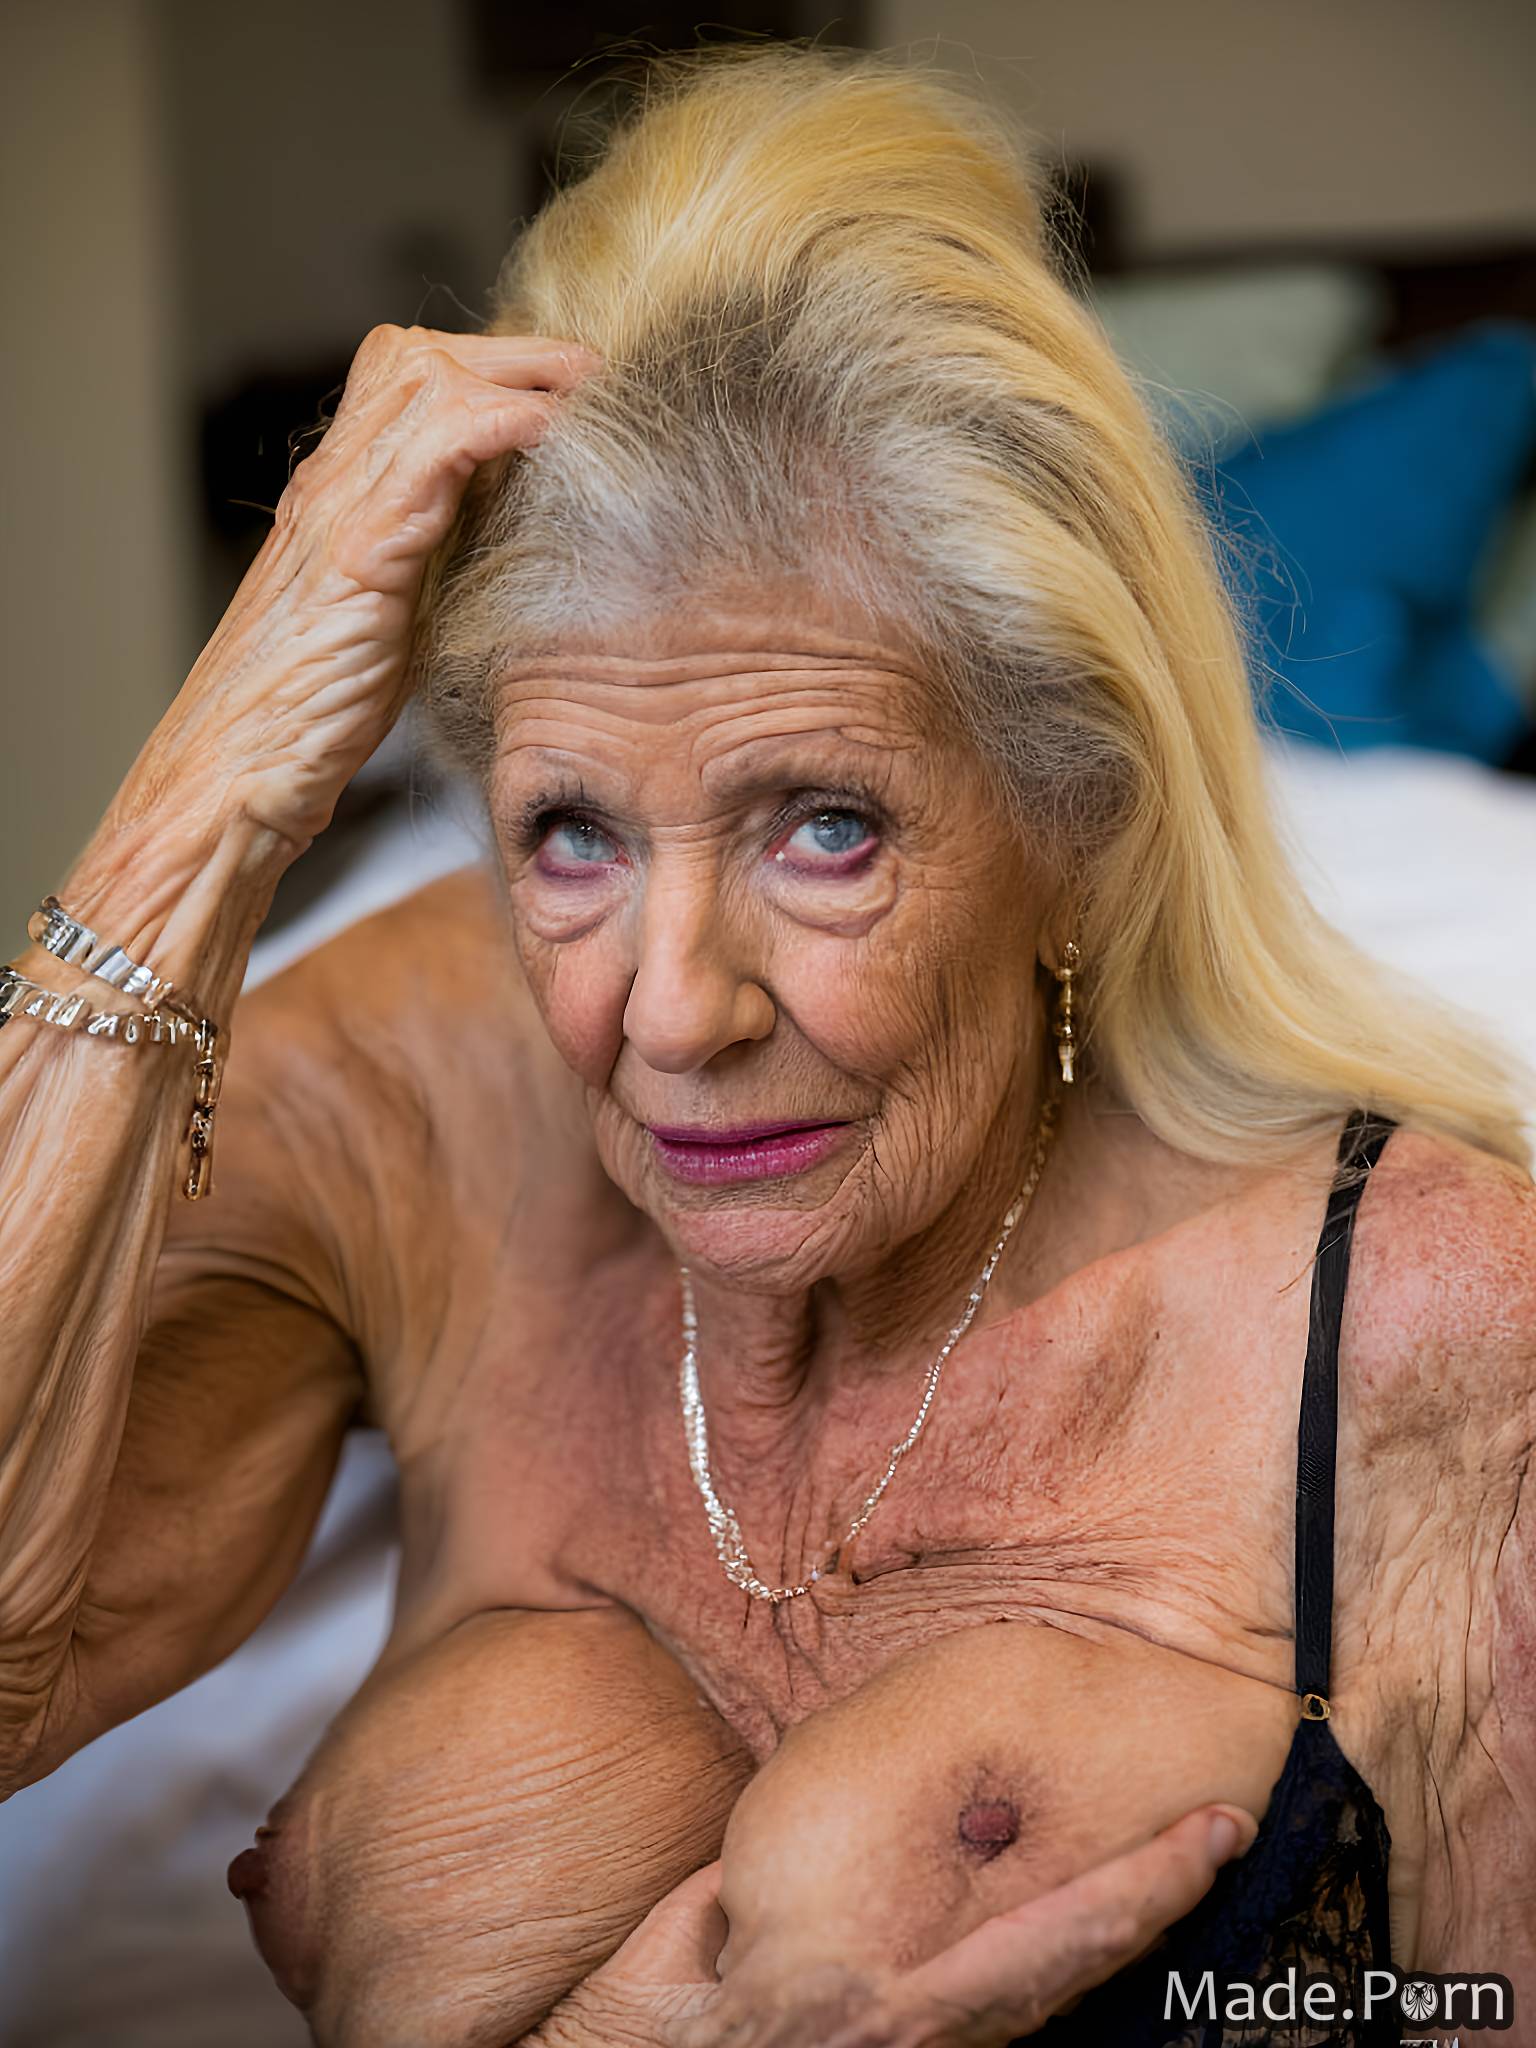 Oldest Women In Porn - Porn image of blowjob 80 nude exhausted blonde Photo created by AI